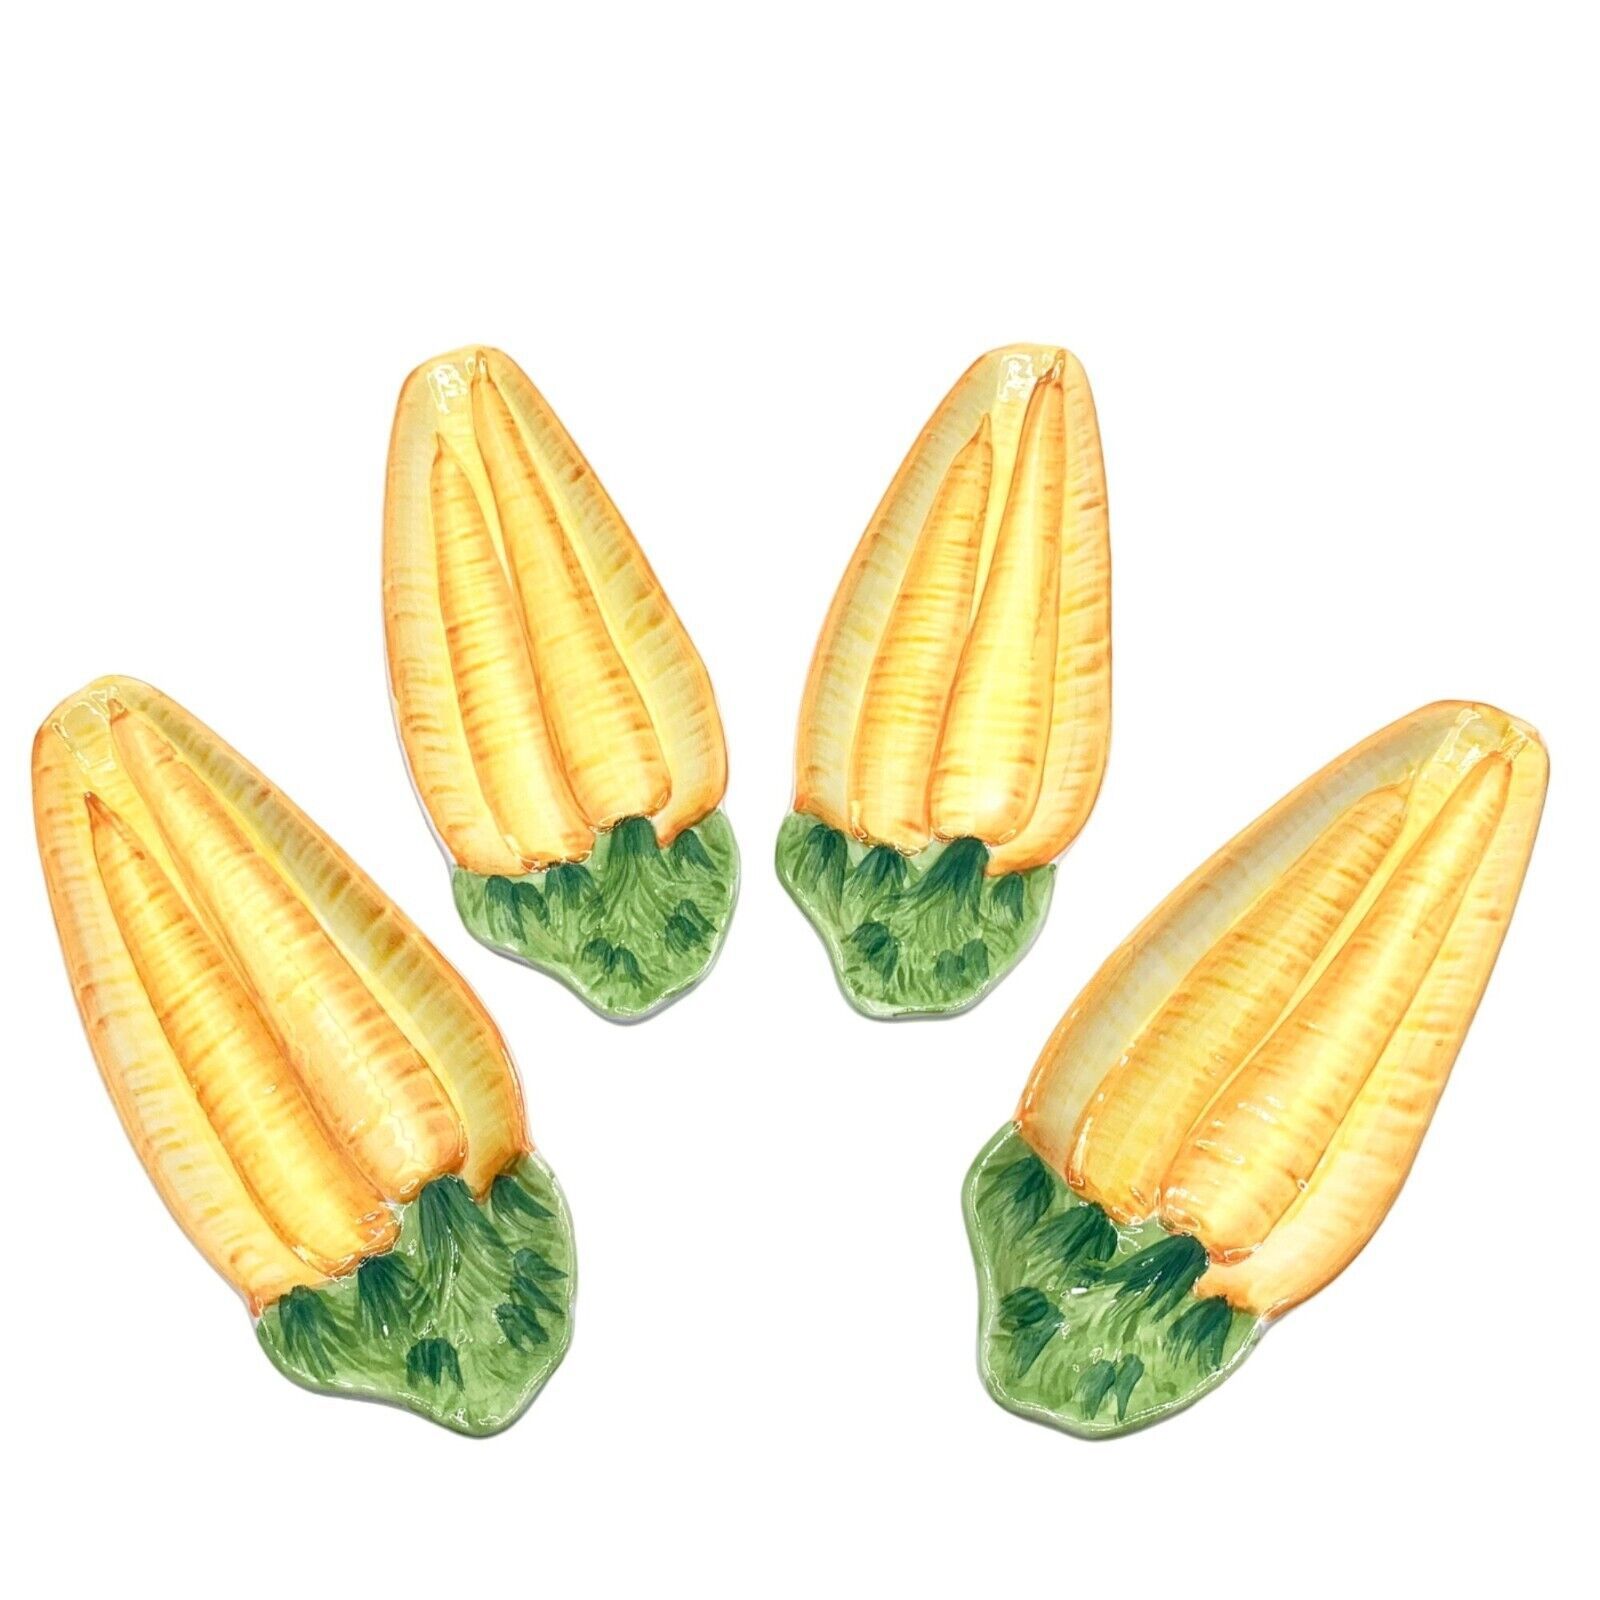 Primary image for Vintage Italian Majolica Style Corn Cob Plates Trays Set of 4 Dining